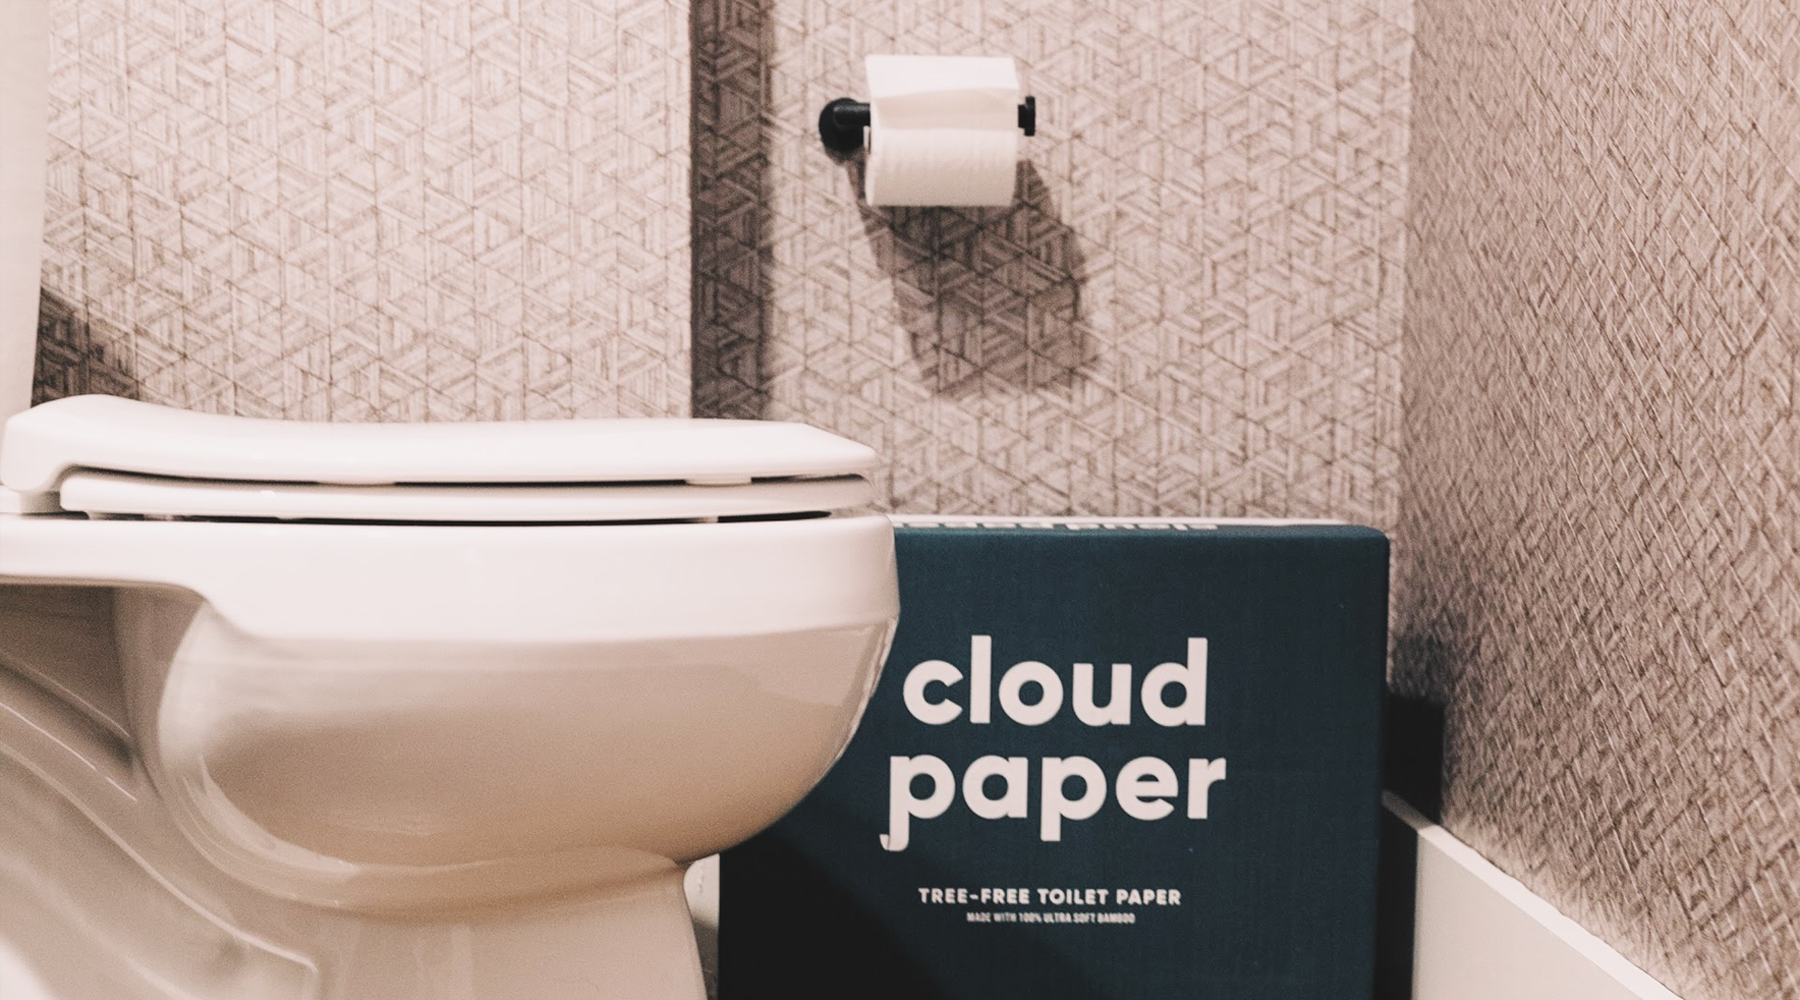 Cloudy Day Toilet Paper Storage | toilet paper holder, bathroom